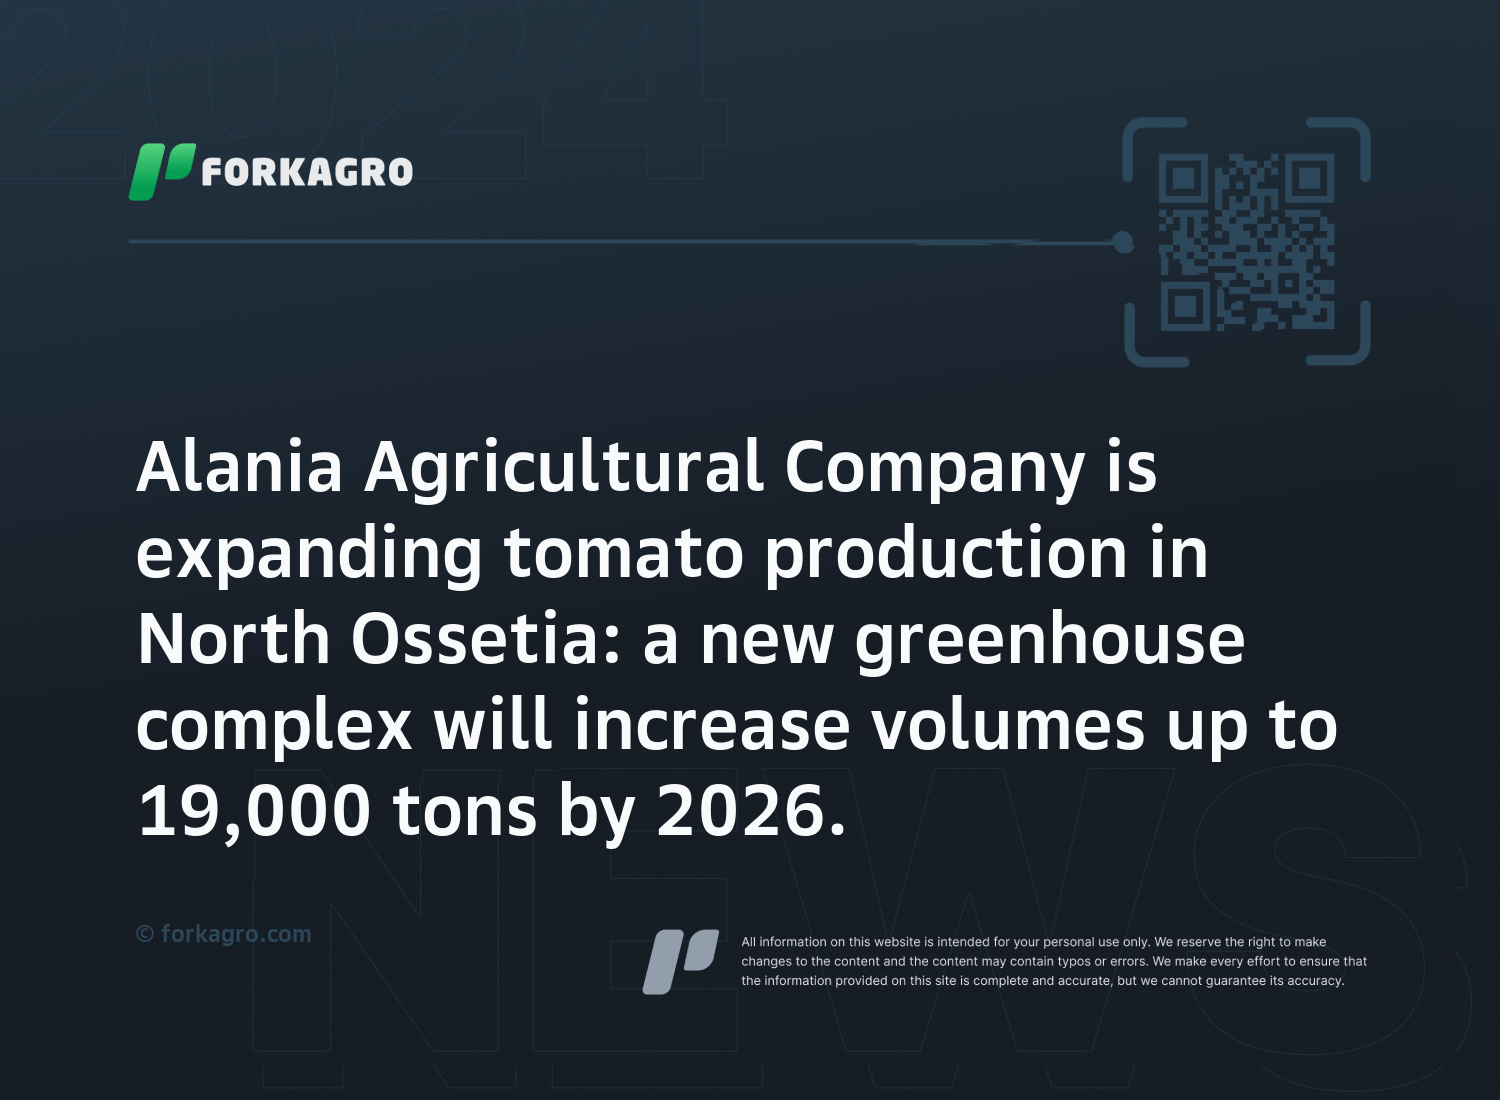 Alania Agricultural Company is expanding tomato production in North Ossetia: a new greenhouse complex will increase volumes up to 19,000 tons by 2026.